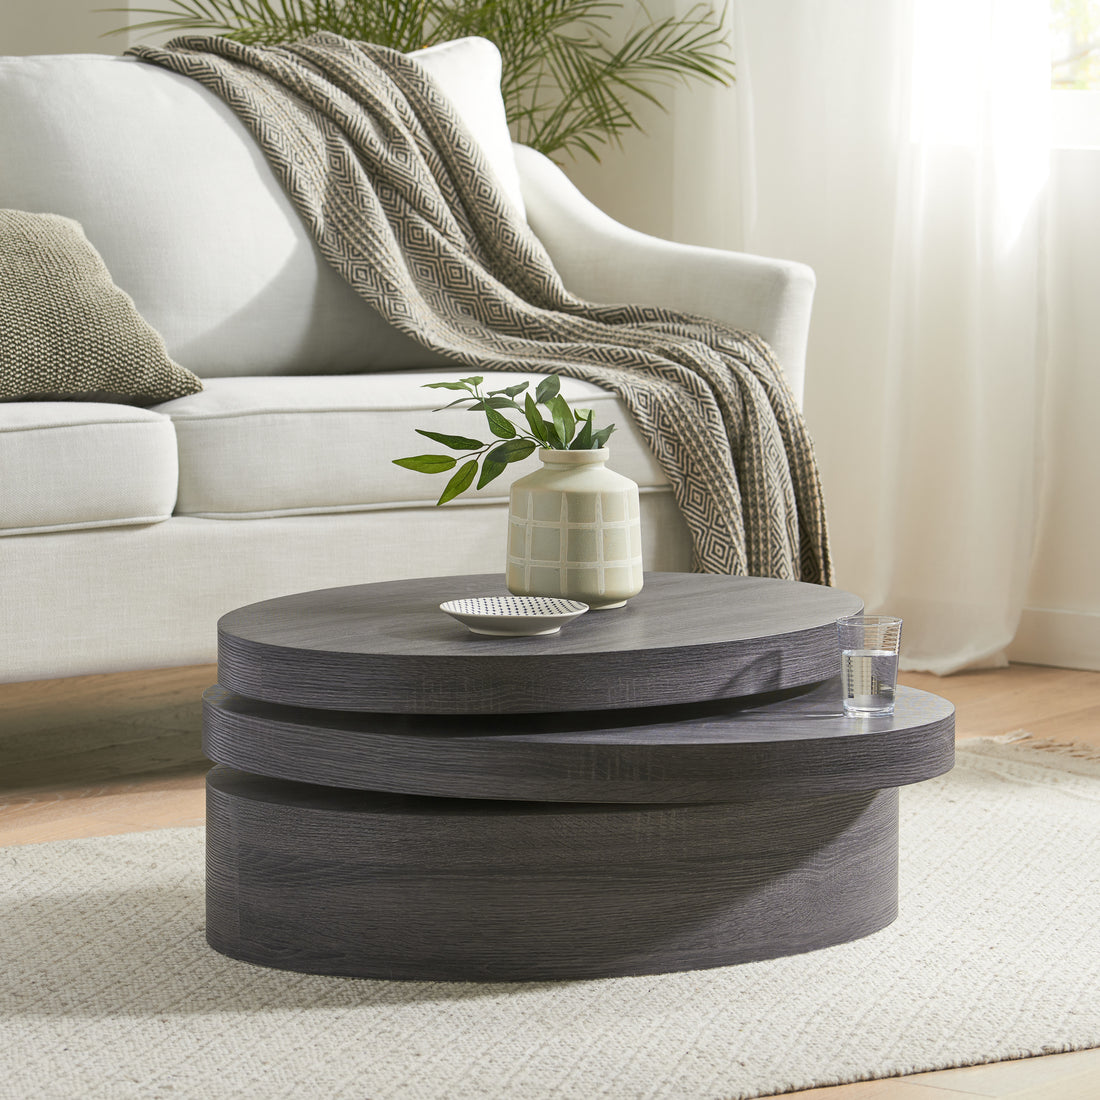 MODERNESQUE ROTATING COFFEE TABLE 1 black-mdf